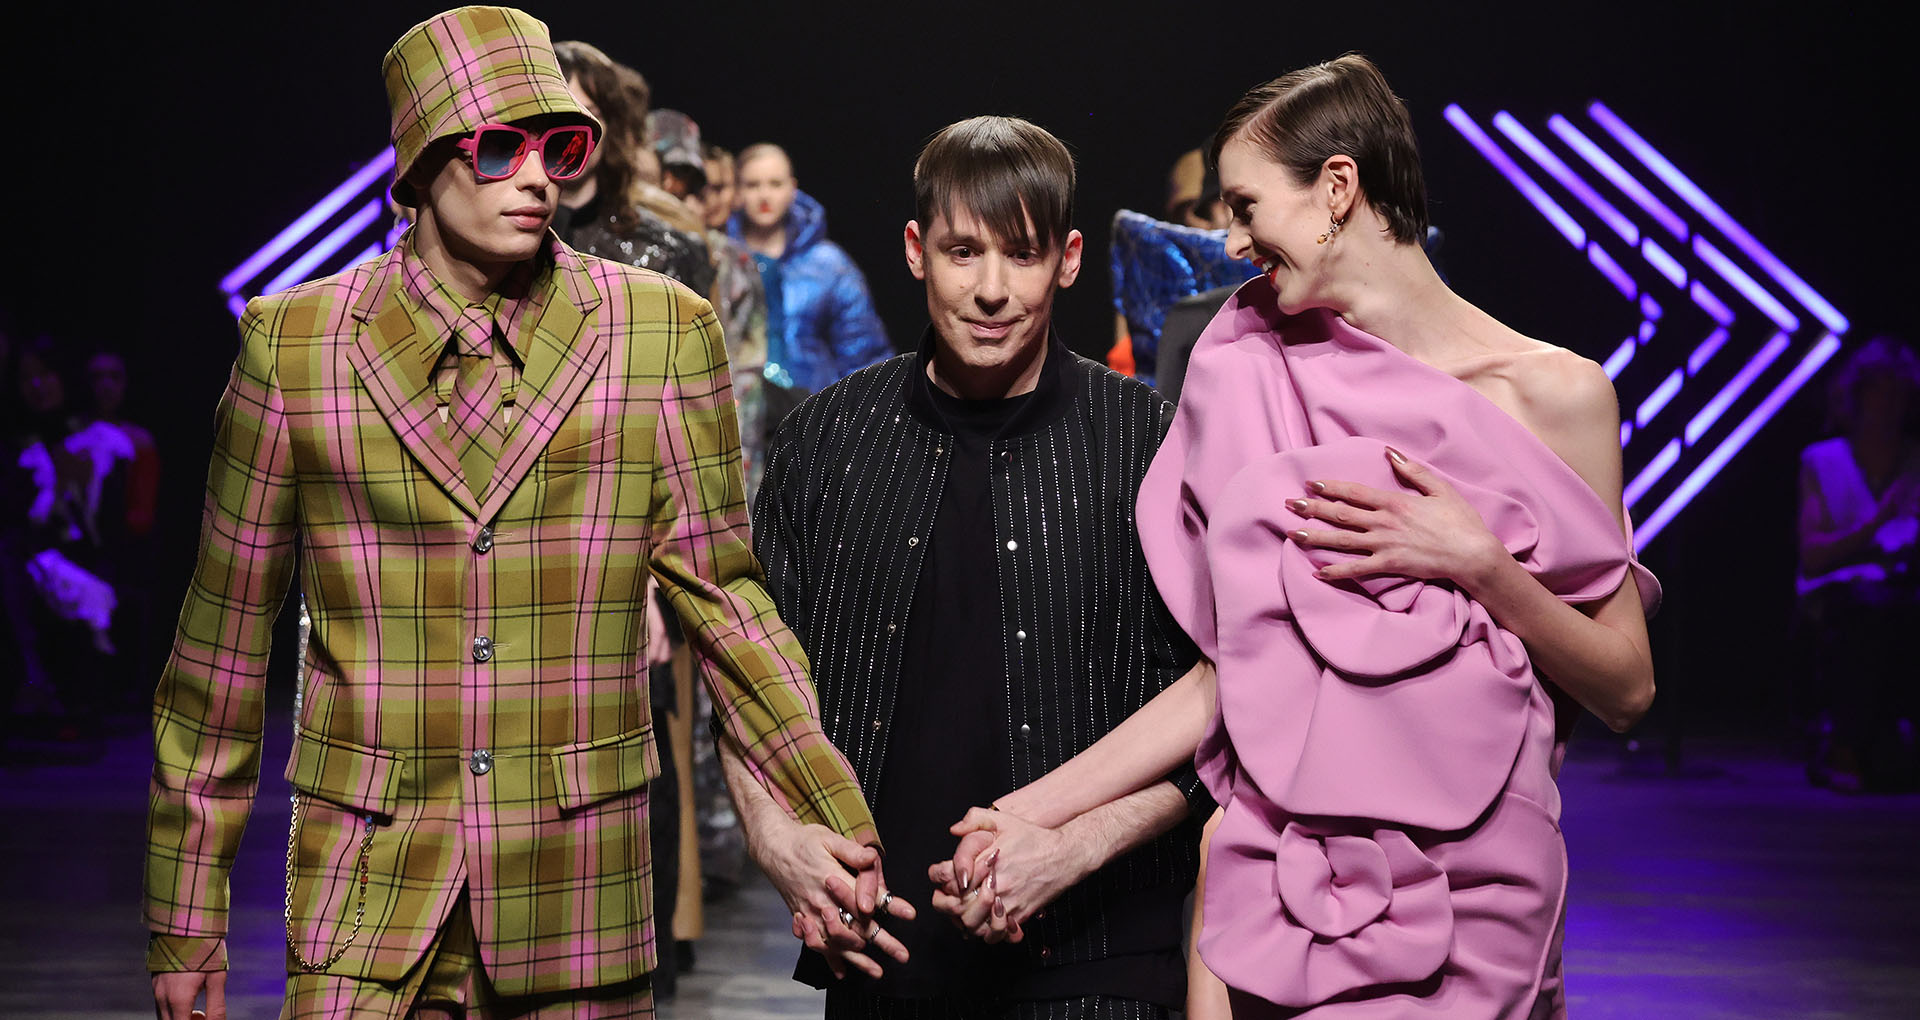 Designer Kilian Kerner comes out to greet the audience on the runway after the Kilian Kerner Runway Show as part of the W.E4. Fashion Day during Berlin Fashion Week AW24 at Verti Music Hall on February 07, 2024 in Berlin, Germany. (Photo by Andreas Rentz/Getty Images for Kilian Kerner)